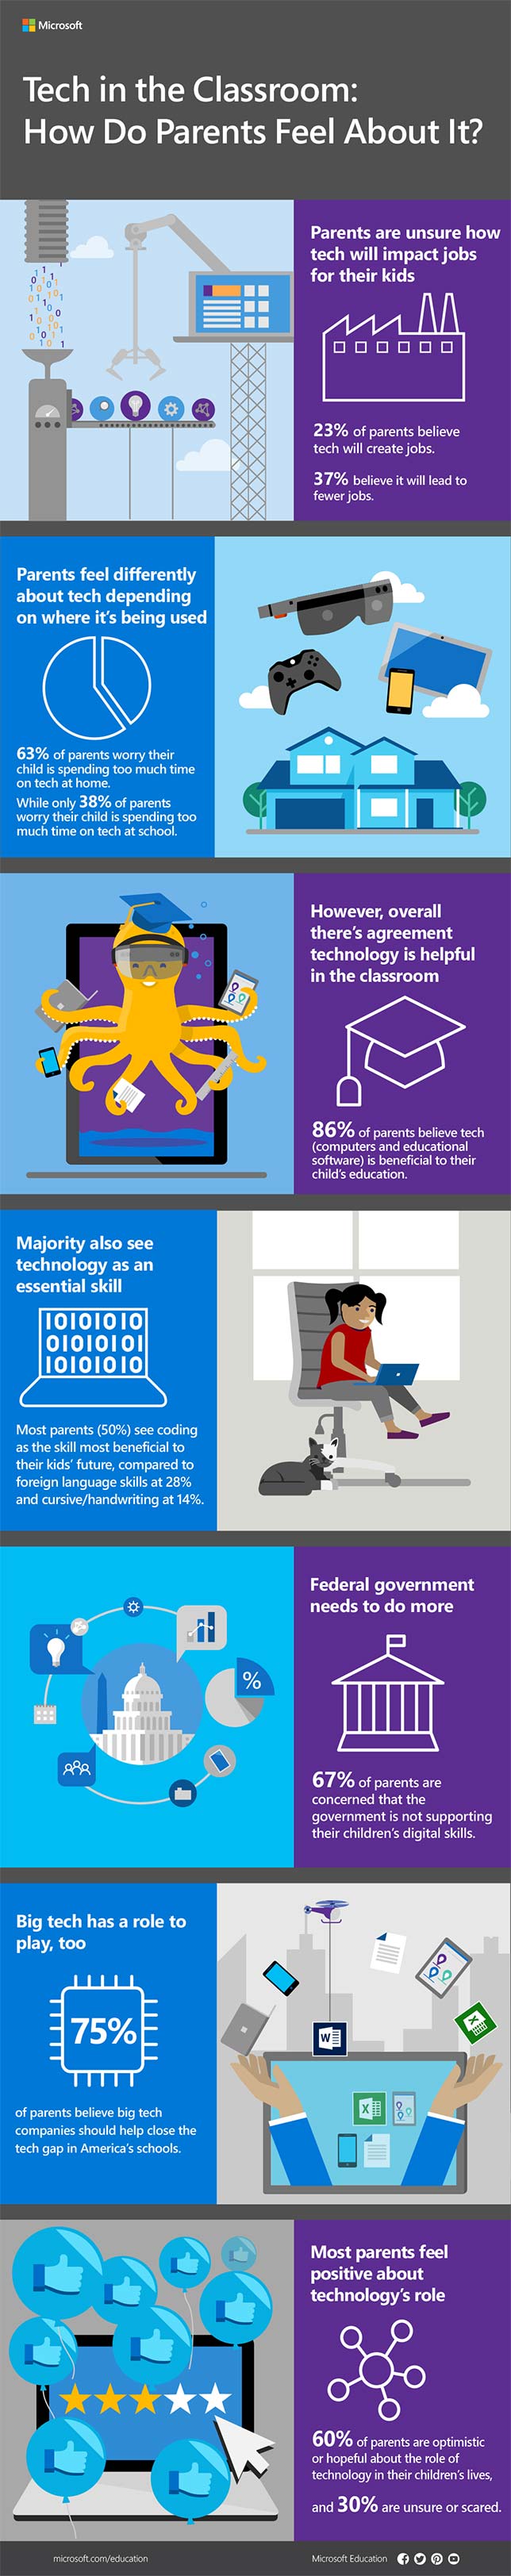 Parents See Tech as Beneficial to Education